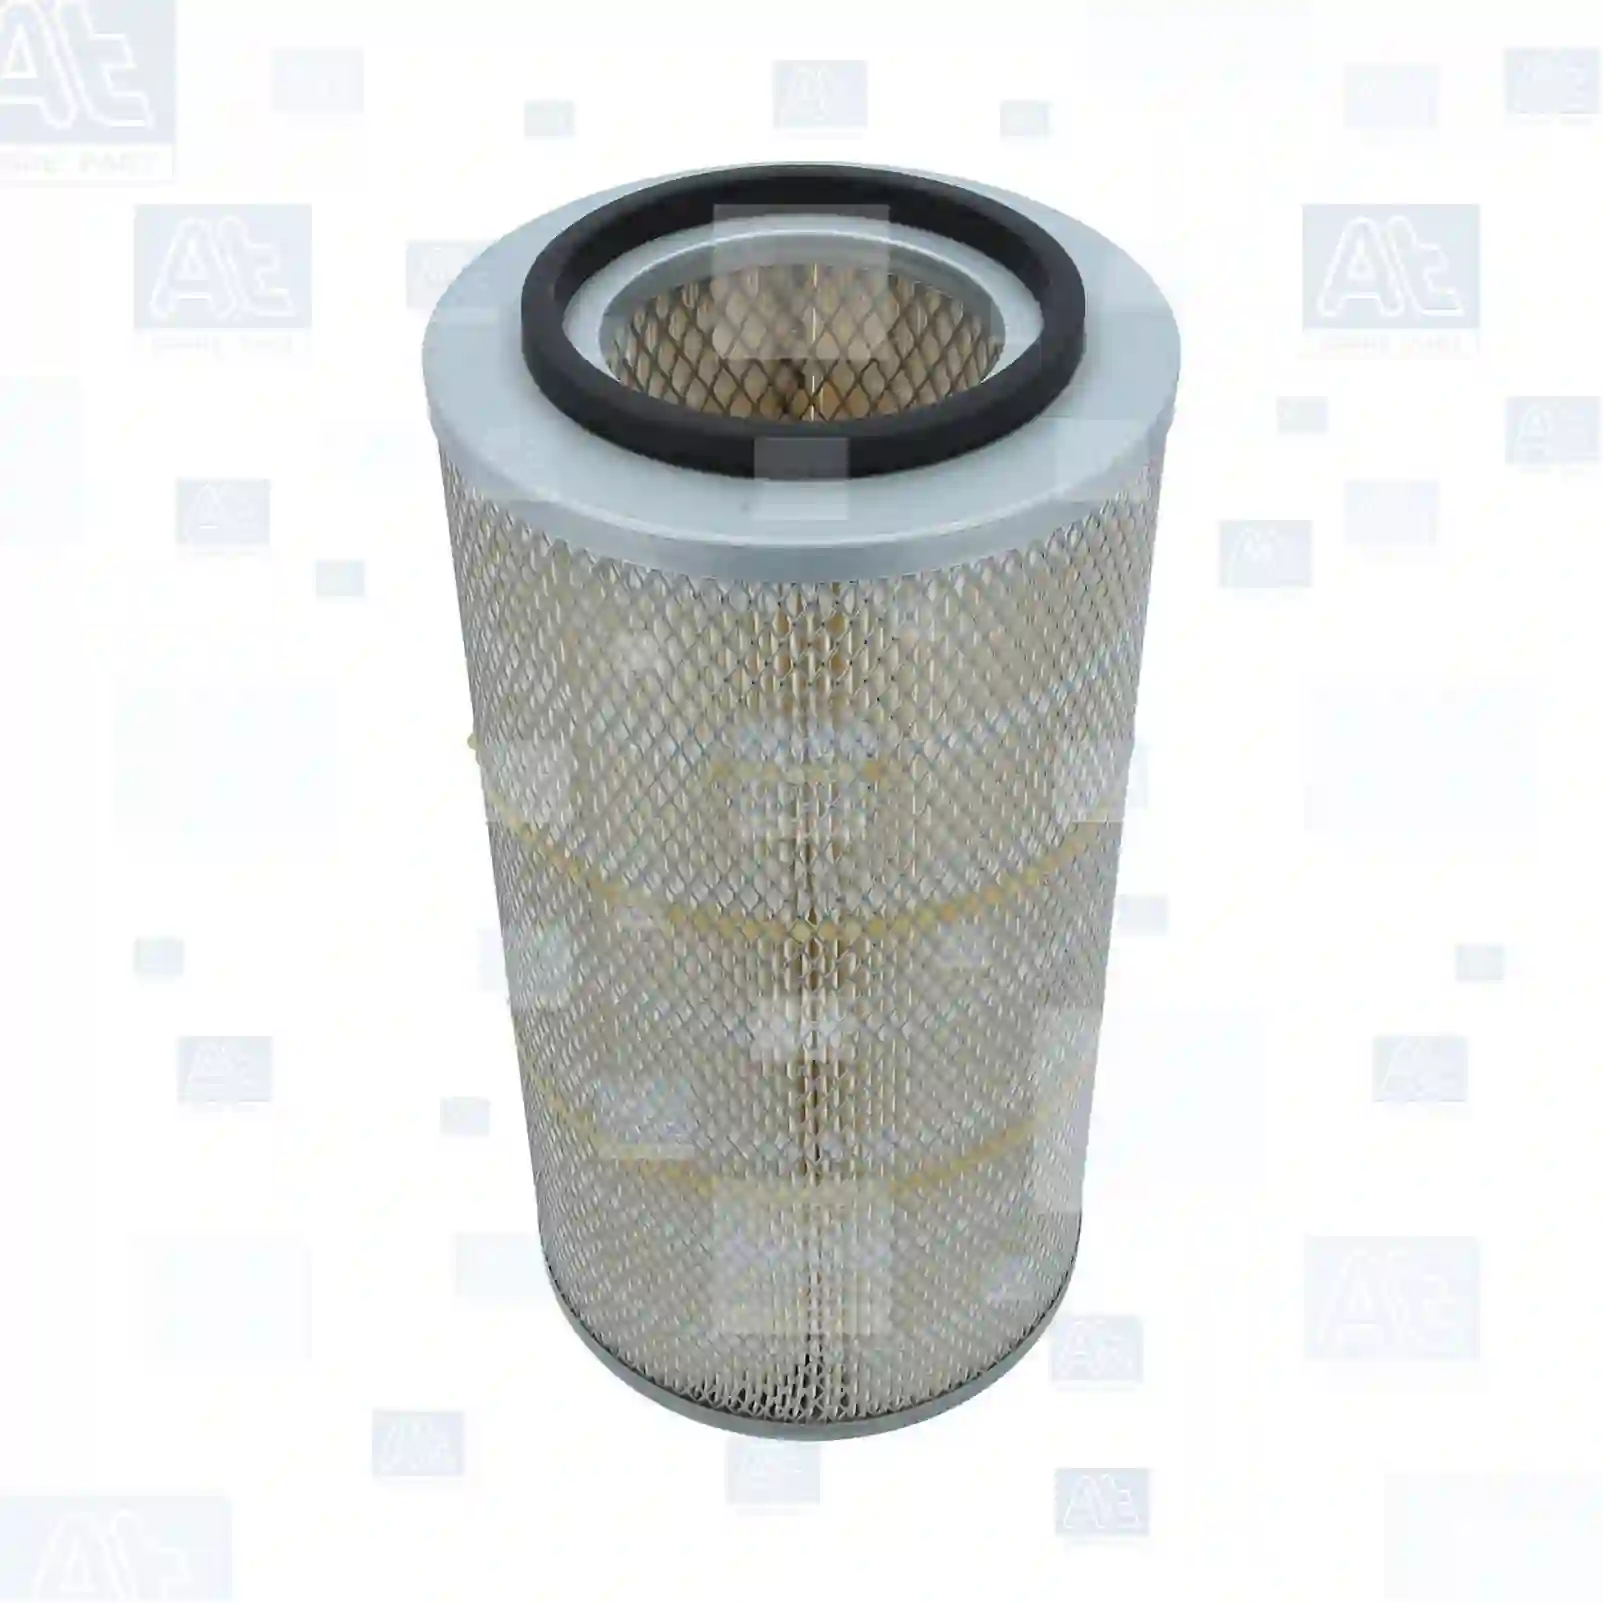 Air filter, at no 77706038, oem no: 8009101116005, 162000190701, 3219420R1, 3219420R91, 3226416R1, 326416R1, 402219502, 87704243, E155526, 3I-0337, 10944204, 10945204, 130941802, 20940004, 0000677400, 0006774340, 0006774341, 153174, 3353440, 0265045, 0289829, 1500299, 265045, 288756, 289829, 396075, ABU8525, 00405174, 29504376, 43262500, 43264500, 988585, 98858500, 00019922, 01186046, 01902077, 02165049, 03018372, 1210702019500, 12153221, 13002B1810, 605412970034, 606901670116, 8009101116005, 190537, 645372, 1210702019500, 0746369, 1470629, 4134366, F184230090050, 01186046, 01902077, 02165049, 04776902, 07124343, 07140539, 08321421, 08323326, 08323337, 08323338, 08323339, 08323340, 09987150, 40278720, 42078290, 75247062, Y03720711, Y05776111, 5011321, 5011552, DNP771561, 265045, 9307846, 94613436, 9974139, 25041936, 25041956, 25041957, 9974139, 3219420R1, 3226416R1, 1-3002B181-0, 00190537, 00645372, 00691351, 01186046, 01902077, 02165049, 04207829, 04776902, 08323326, 08323337, 08323338, 08323339, 08323340, 09987150, 1902077, 2165049, 42078290, 8323326, 8323337, 8323338, 8323339, 8323340, 41AJ58184, AZ30575, AZ30757, DQ43483, PE10011906, PE10011908, 34000489, 01186046, 01902077, 02165049, 01186046, 04776902, 09987150, 5106189, 7360753, 736075380, 04532555104, 04532555105, 04532592304, 08183040055, 62000190701, 81083016278, 81083040049, 81083040055, 81083040056, 82083040055, 022186T1, 677434C0, 0001945204, 0010944204, 0010945201, 0010945204, 0010945304, 0020940004, 0130941802, 0230000207, 3410947004, 3440947104, 605412970010, 605412970034, 606901670116, 00822421, 16546-27610, 190537, 645372, 691351, 0250591, 150591, 150599, 2412429, 250591, 850501, G0250591, G250591, L0350530, L350530, 61200190037, 99000190701, 0003563512, 0003564512, 0004212747, 0004214313, 0024551184, 0060377200, 0500241796, 5000241756, 5000241796, 6005019667, R940, 5106189, ABU8525, 4631072, 218989, 8319009084, 8319069084, 162000190701, 61200190037, 62000190701, 99000190701, 195946216, 351920, 802705, 80270500, 82636000, 82640600, CH12385, 2165049, 217362224, 362224, 3622243, 3622248, 3950728, 4780961, 4782961, 7362224, 73622243, 7362244, 900691, 9207230002, 140503286, T2D129620, 931353, ZG00849-0008 At Spare Part | Engine, Accelerator Pedal, Camshaft, Connecting Rod, Crankcase, Crankshaft, Cylinder Head, Engine Suspension Mountings, Exhaust Manifold, Exhaust Gas Recirculation, Filter Kits, Flywheel Housing, General Overhaul Kits, Engine, Intake Manifold, Oil Cleaner, Oil Cooler, Oil Filter, Oil Pump, Oil Sump, Piston & Liner, Sensor & Switch, Timing Case, Turbocharger, Cooling System, Belt Tensioner, Coolant Filter, Coolant Pipe, Corrosion Prevention Agent, Drive, Expansion Tank, Fan, Intercooler, Monitors & Gauges, Radiator, Thermostat, V-Belt / Timing belt, Water Pump, Fuel System, Electronical Injector Unit, Feed Pump, Fuel Filter, cpl., Fuel Gauge Sender,  Fuel Line, Fuel Pump, Fuel Tank, Injection Line Kit, Injection Pump, Exhaust System, Clutch & Pedal, Gearbox, Propeller Shaft, Axles, Brake System, Hubs & Wheels, Suspension, Leaf Spring, Universal Parts / Accessories, Steering, Electrical System, Cabin Air filter, at no 77706038, oem no: 8009101116005, 162000190701, 3219420R1, 3219420R91, 3226416R1, 326416R1, 402219502, 87704243, E155526, 3I-0337, 10944204, 10945204, 130941802, 20940004, 0000677400, 0006774340, 0006774341, 153174, 3353440, 0265045, 0289829, 1500299, 265045, 288756, 289829, 396075, ABU8525, 00405174, 29504376, 43262500, 43264500, 988585, 98858500, 00019922, 01186046, 01902077, 02165049, 03018372, 1210702019500, 12153221, 13002B1810, 605412970034, 606901670116, 8009101116005, 190537, 645372, 1210702019500, 0746369, 1470629, 4134366, F184230090050, 01186046, 01902077, 02165049, 04776902, 07124343, 07140539, 08321421, 08323326, 08323337, 08323338, 08323339, 08323340, 09987150, 40278720, 42078290, 75247062, Y03720711, Y05776111, 5011321, 5011552, DNP771561, 265045, 9307846, 94613436, 9974139, 25041936, 25041956, 25041957, 9974139, 3219420R1, 3226416R1, 1-3002B181-0, 00190537, 00645372, 00691351, 01186046, 01902077, 02165049, 04207829, 04776902, 08323326, 08323337, 08323338, 08323339, 08323340, 09987150, 1902077, 2165049, 42078290, 8323326, 8323337, 8323338, 8323339, 8323340, 41AJ58184, AZ30575, AZ30757, DQ43483, PE10011906, PE10011908, 34000489, 01186046, 01902077, 02165049, 01186046, 04776902, 09987150, 5106189, 7360753, 736075380, 04532555104, 04532555105, 04532592304, 08183040055, 62000190701, 81083016278, 81083040049, 81083040055, 81083040056, 82083040055, 022186T1, 677434C0, 0001945204, 0010944204, 0010945201, 0010945204, 0010945304, 0020940004, 0130941802, 0230000207, 3410947004, 3440947104, 605412970010, 605412970034, 606901670116, 00822421, 16546-27610, 190537, 645372, 691351, 0250591, 150591, 150599, 2412429, 250591, 850501, G0250591, G250591, L0350530, L350530, 61200190037, 99000190701, 0003563512, 0003564512, 0004212747, 0004214313, 0024551184, 0060377200, 0500241796, 5000241756, 5000241796, 6005019667, R940, 5106189, ABU8525, 4631072, 218989, 8319009084, 8319069084, 162000190701, 61200190037, 62000190701, 99000190701, 195946216, 351920, 802705, 80270500, 82636000, 82640600, CH12385, 2165049, 217362224, 362224, 3622243, 3622248, 3950728, 4780961, 4782961, 7362224, 73622243, 7362244, 900691, 9207230002, 140503286, T2D129620, 931353, ZG00849-0008 At Spare Part | Engine, Accelerator Pedal, Camshaft, Connecting Rod, Crankcase, Crankshaft, Cylinder Head, Engine Suspension Mountings, Exhaust Manifold, Exhaust Gas Recirculation, Filter Kits, Flywheel Housing, General Overhaul Kits, Engine, Intake Manifold, Oil Cleaner, Oil Cooler, Oil Filter, Oil Pump, Oil Sump, Piston & Liner, Sensor & Switch, Timing Case, Turbocharger, Cooling System, Belt Tensioner, Coolant Filter, Coolant Pipe, Corrosion Prevention Agent, Drive, Expansion Tank, Fan, Intercooler, Monitors & Gauges, Radiator, Thermostat, V-Belt / Timing belt, Water Pump, Fuel System, Electronical Injector Unit, Feed Pump, Fuel Filter, cpl., Fuel Gauge Sender,  Fuel Line, Fuel Pump, Fuel Tank, Injection Line Kit, Injection Pump, Exhaust System, Clutch & Pedal, Gearbox, Propeller Shaft, Axles, Brake System, Hubs & Wheels, Suspension, Leaf Spring, Universal Parts / Accessories, Steering, Electrical System, Cabin